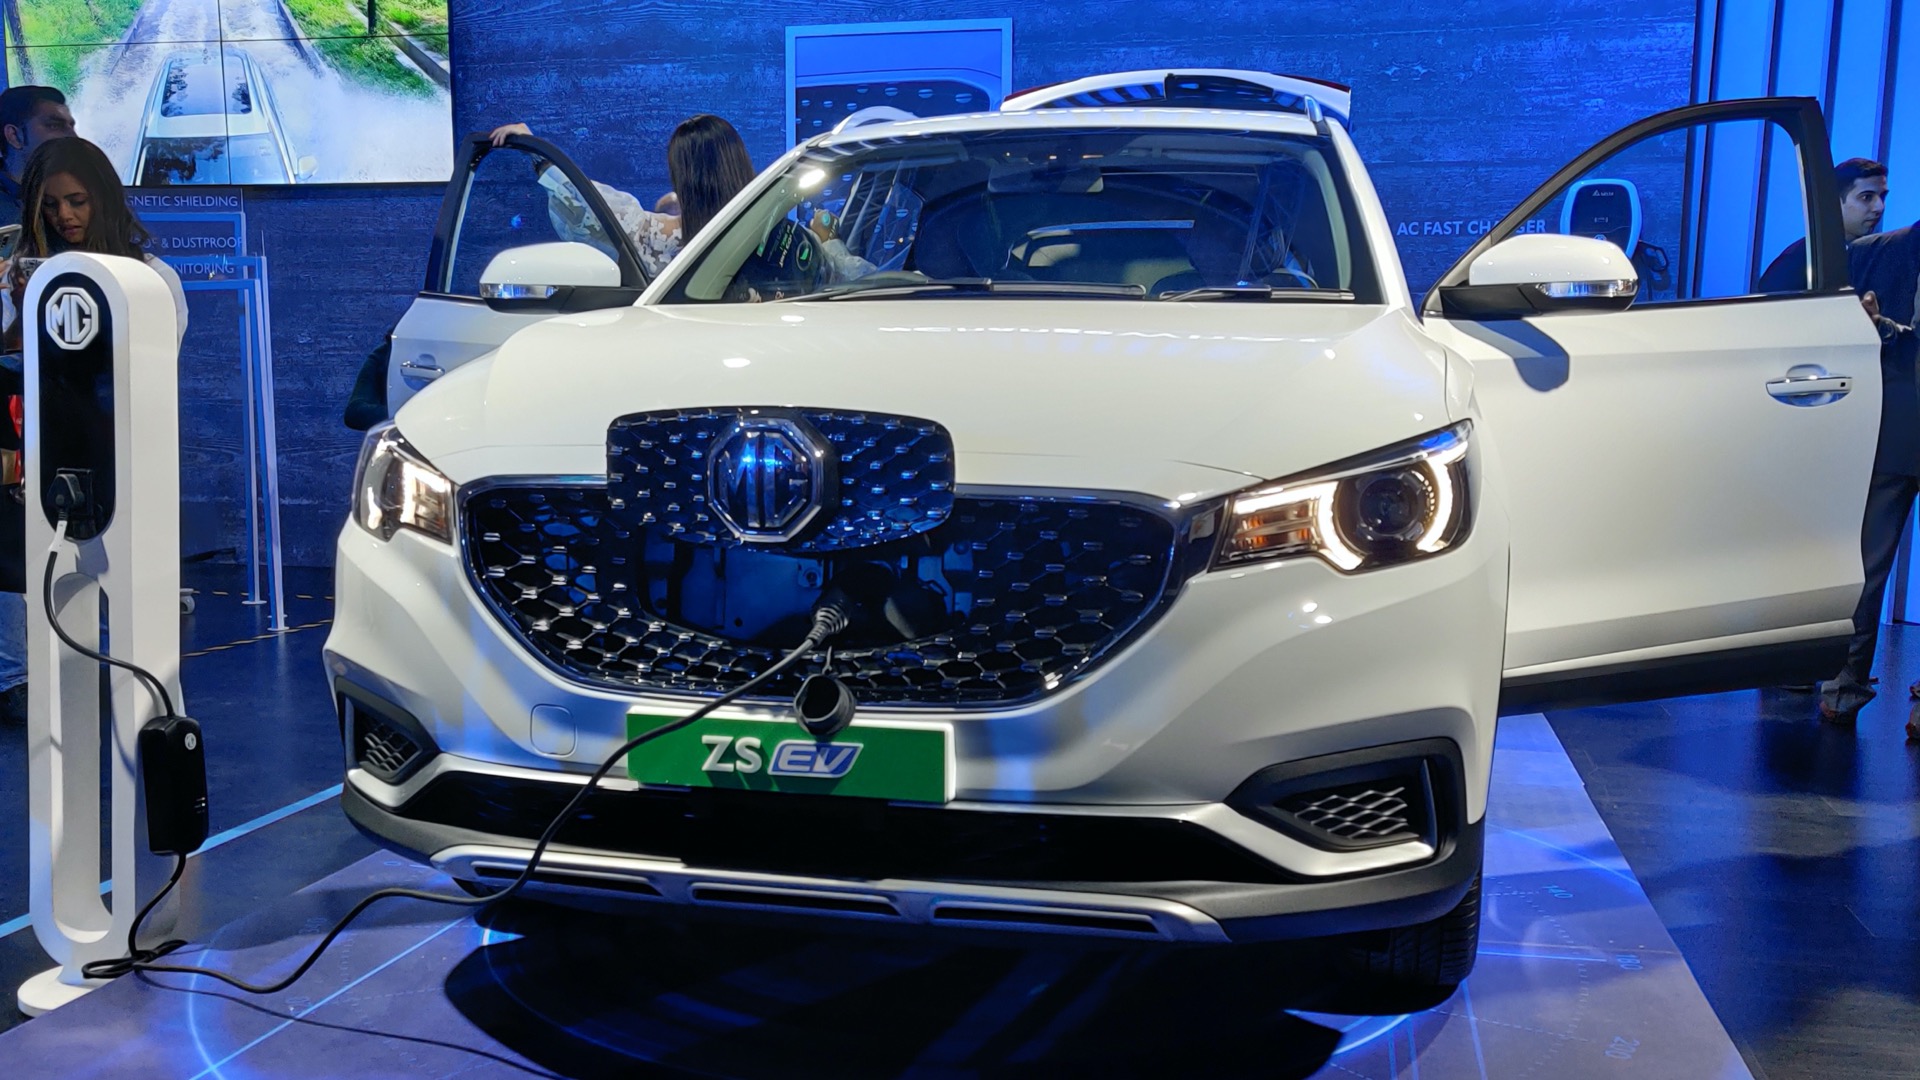 MG Motor announces ZS EV, its first electric car in India TechRadar